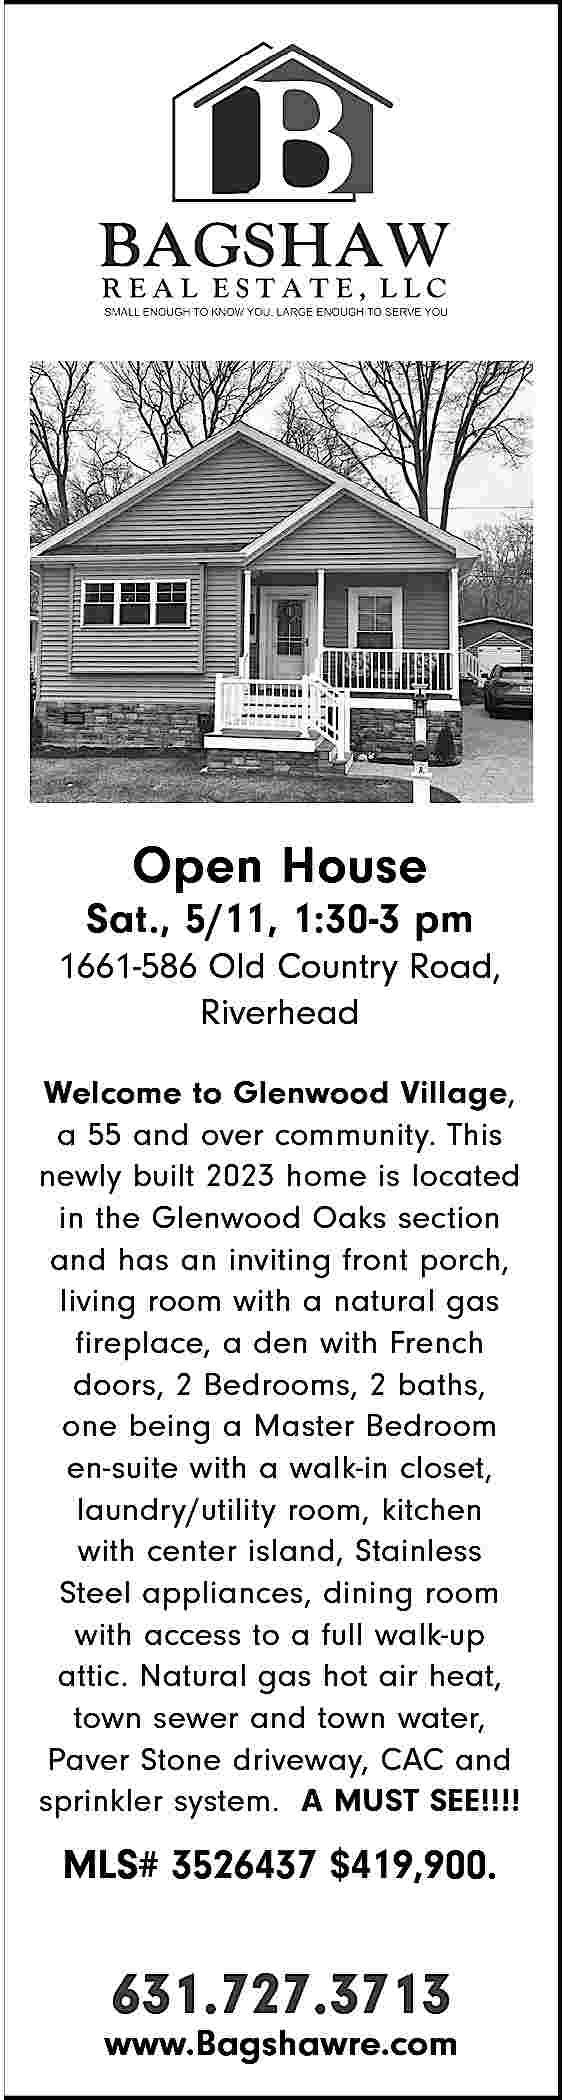 Open House <br> <br>Sat., 5/11,  Open House    Sat., 5/11, 1:30-3 pm  1661-586 Old Country Road,  Riverhead  Welcome to Glenwood Village,  a 55 and over community. This  newly built 2023 home is located  in the Glenwood Oaks section  and has an inviting front porch,  living room with a natural gas  fireplace, a den with French  doors, 2 Bedrooms, 2 baths,  one being a Master Bedroom  en-suite with a walk-in closet,  laundry/utility room, kitchen  with center island, Stainless  Steel appliances, dining room  with access to a full walk-up  attic. Natural gas hot air heat,  town sewer and town water,  Paver Stone driveway, CAC and  sprinkler system. A MUST SEE!!!!    MLS# 3526437 $419,900.    631.727.3713    www.Bagshawre.com     